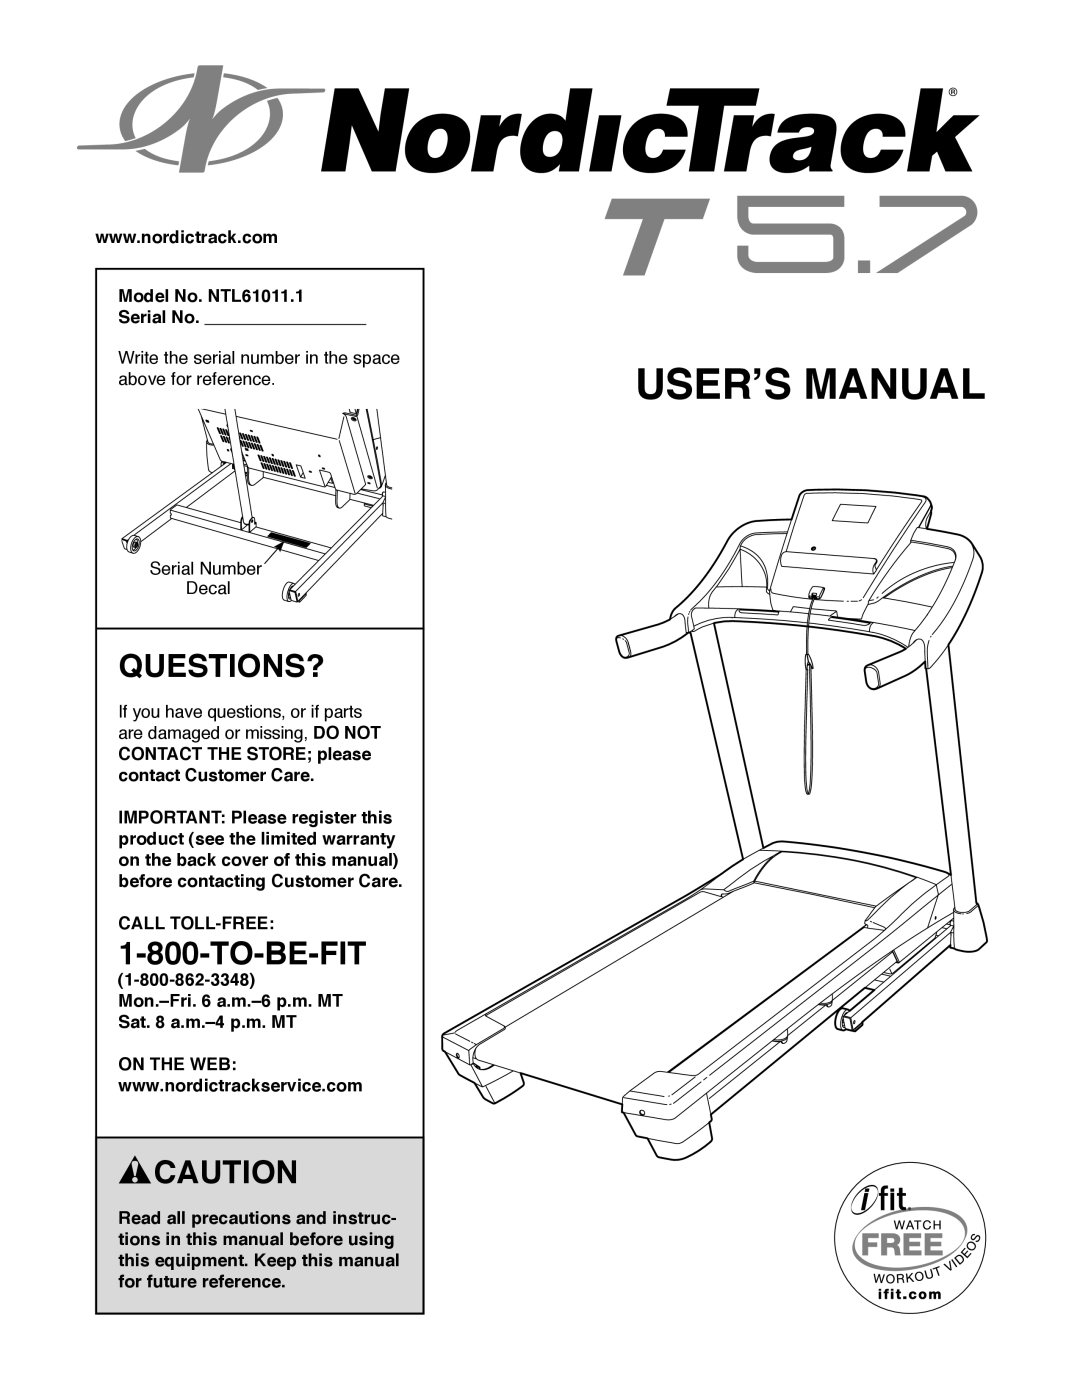 Sears NTL61011.1 user manual Questions?, To-Be-Fit, User’S Manual 